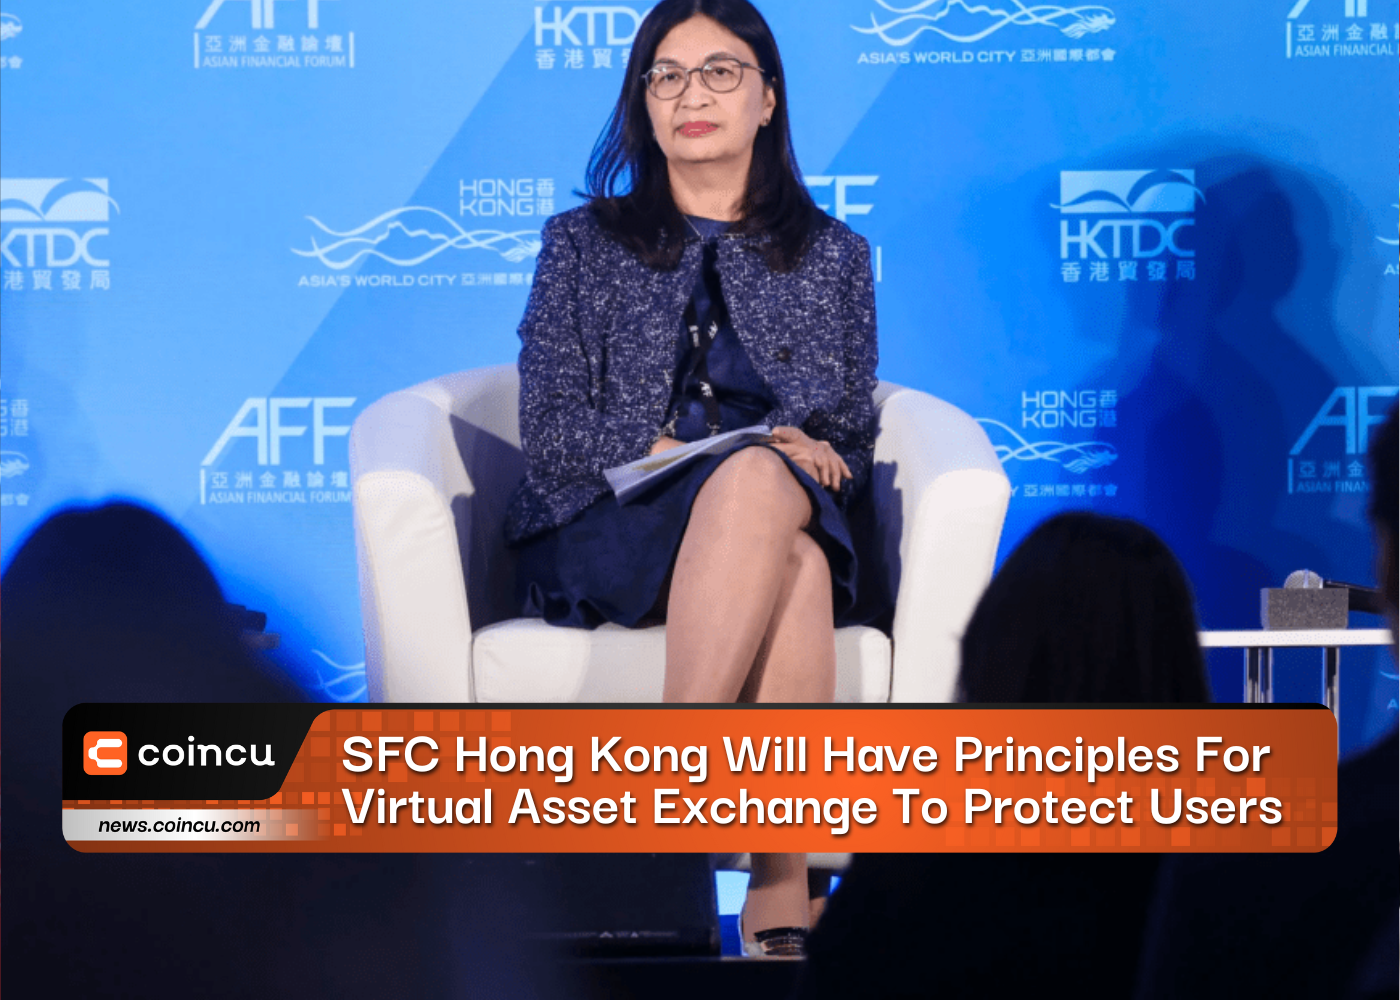 SFC Hong Kong Will Have Principles For Virtual Asset Exchange To Protect Users